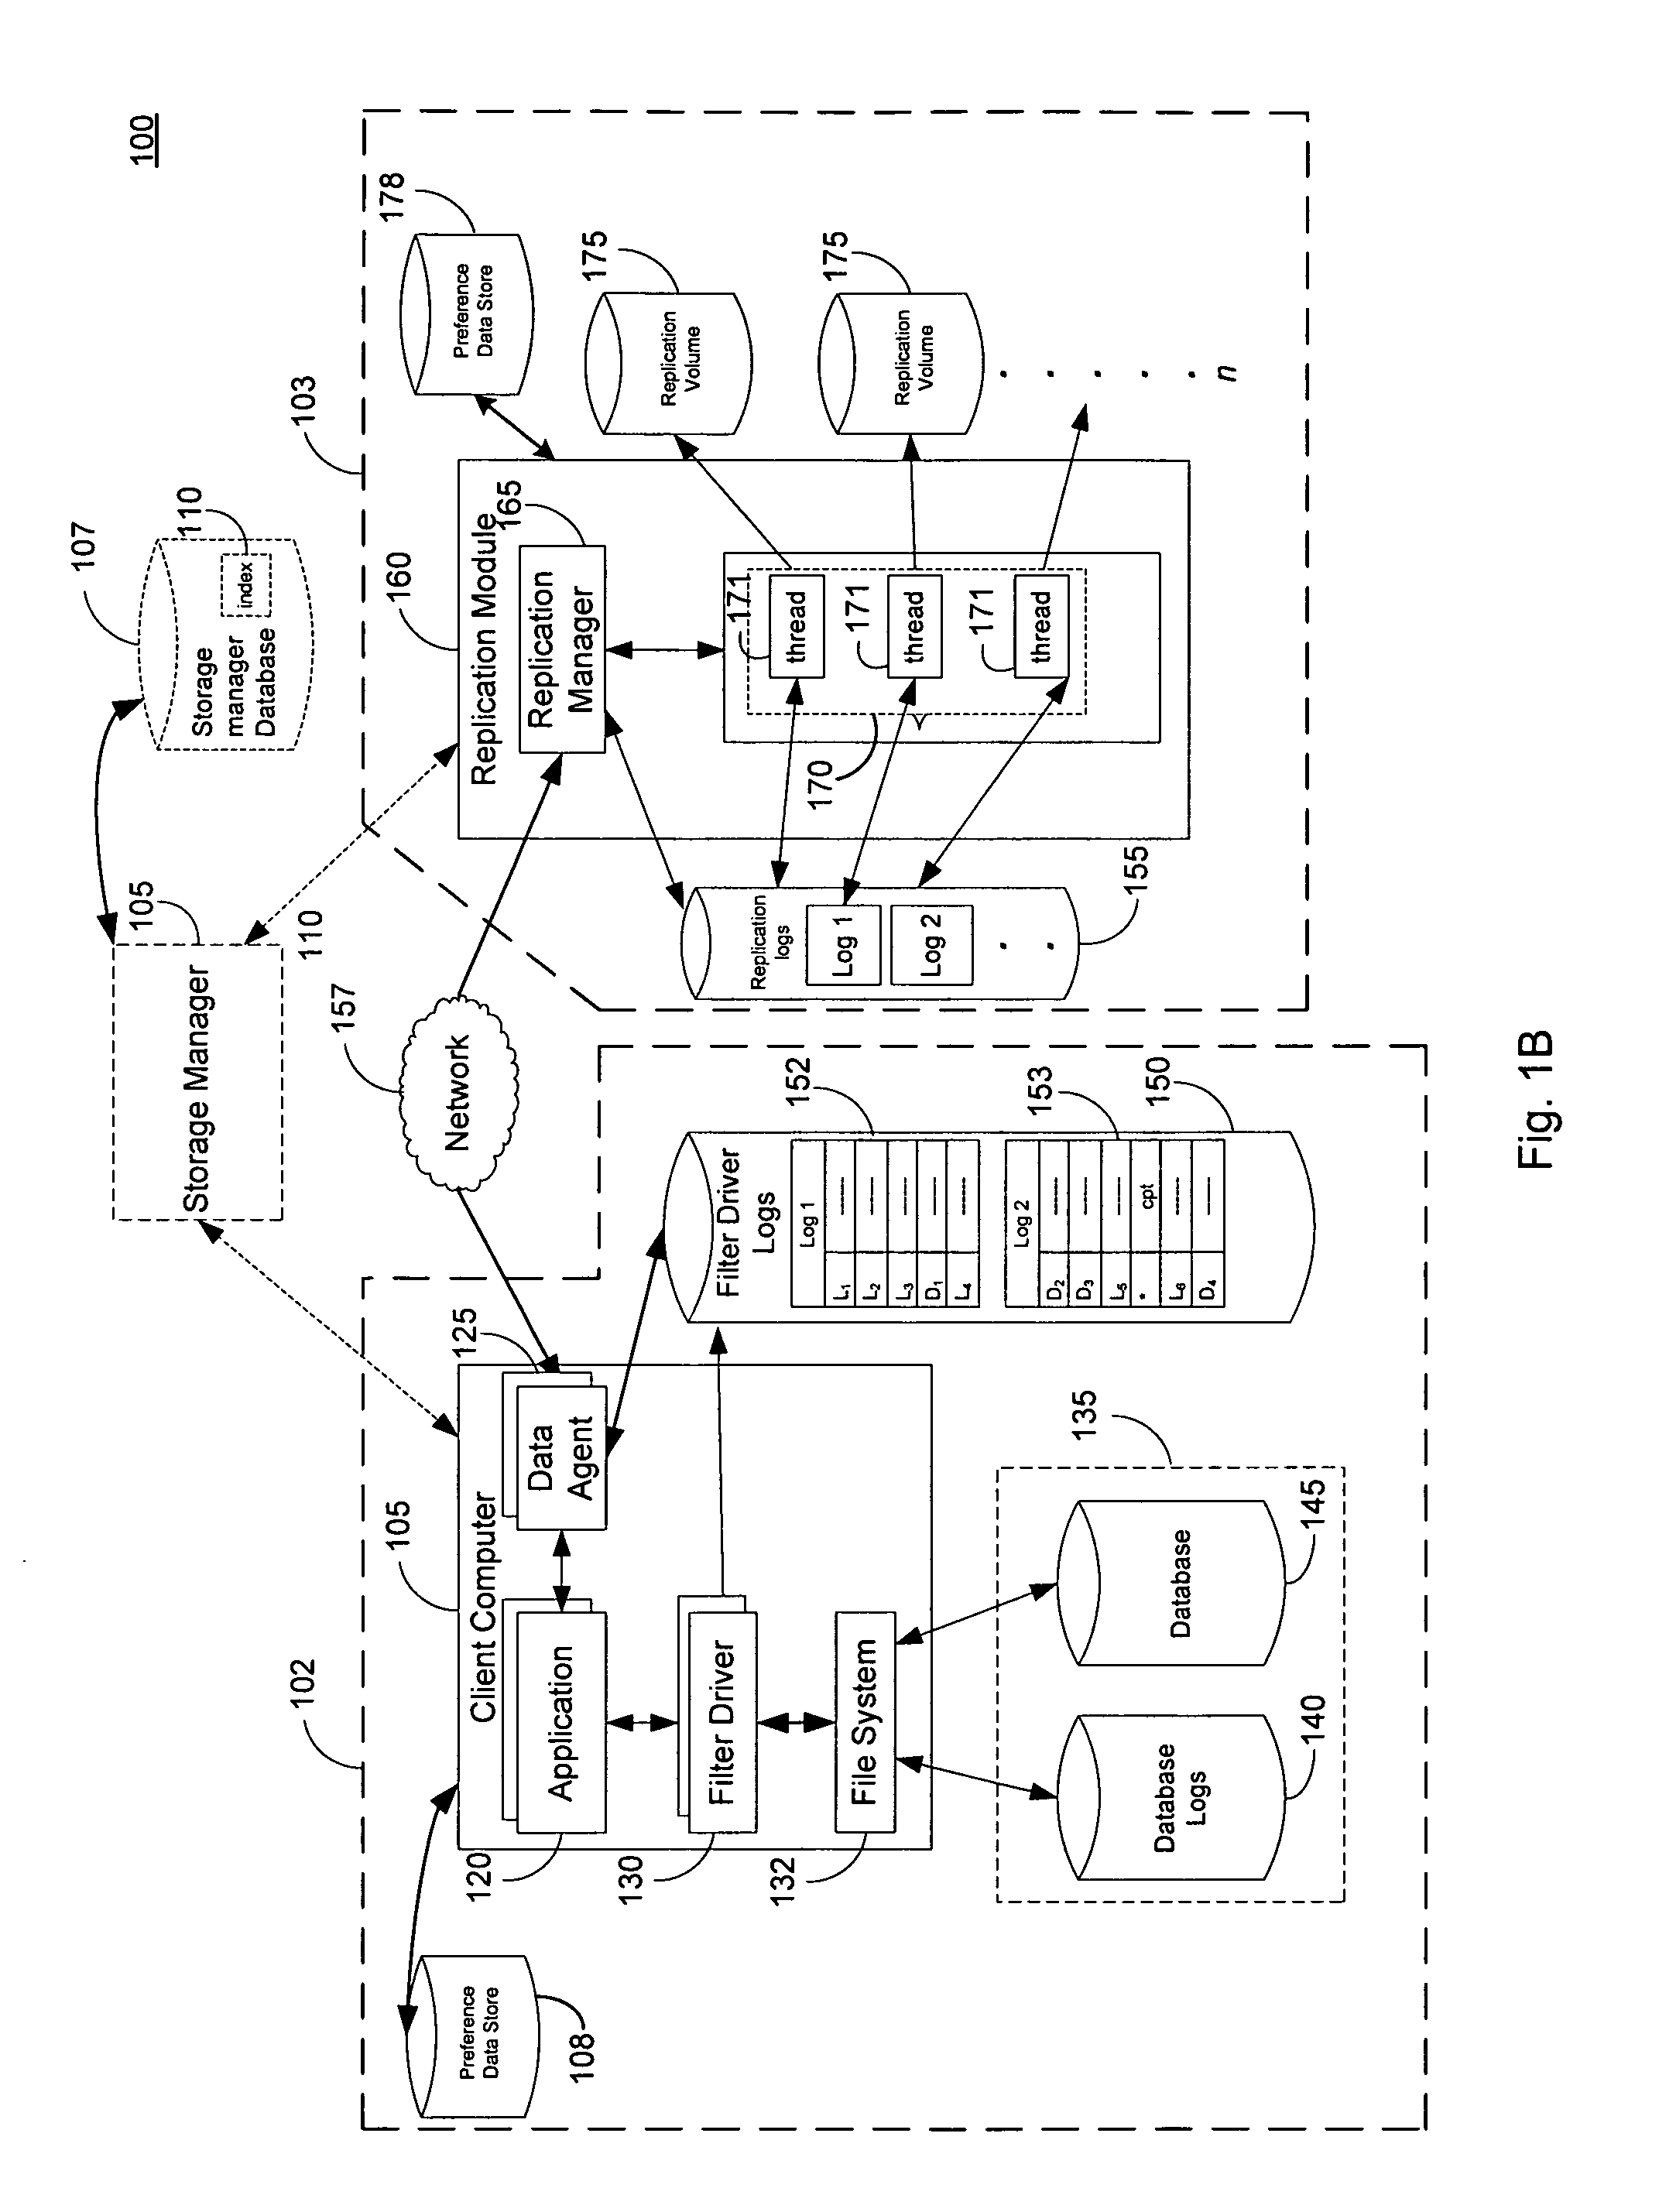 Systems and methods for continuous data replication